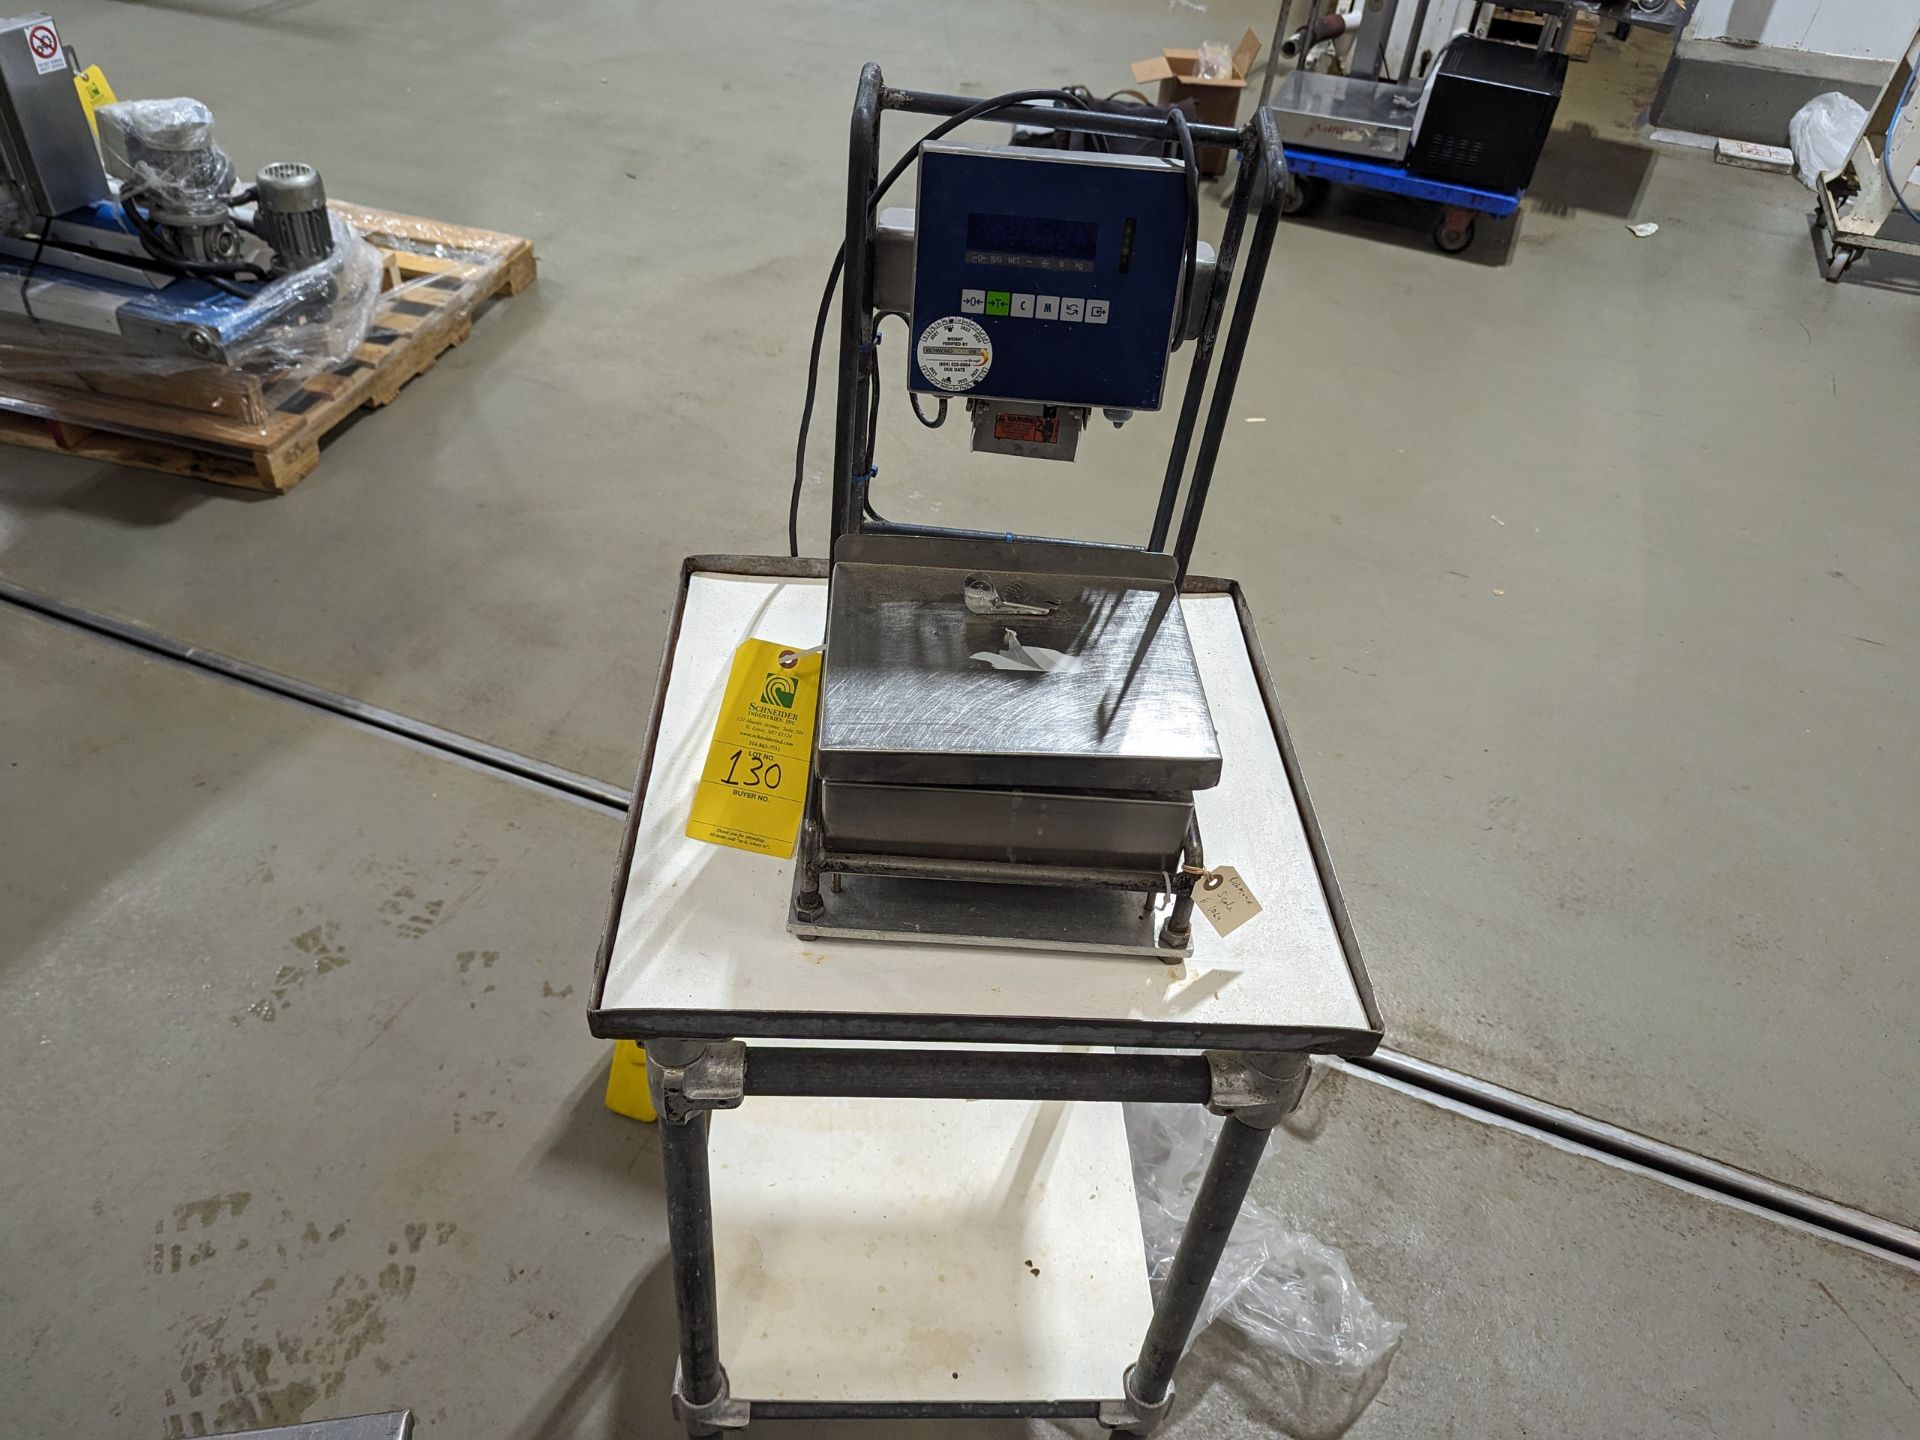 Mettler Toledo Panther 10 x 8 Bench Scale, Dimensions LxWxH: 10x12x19